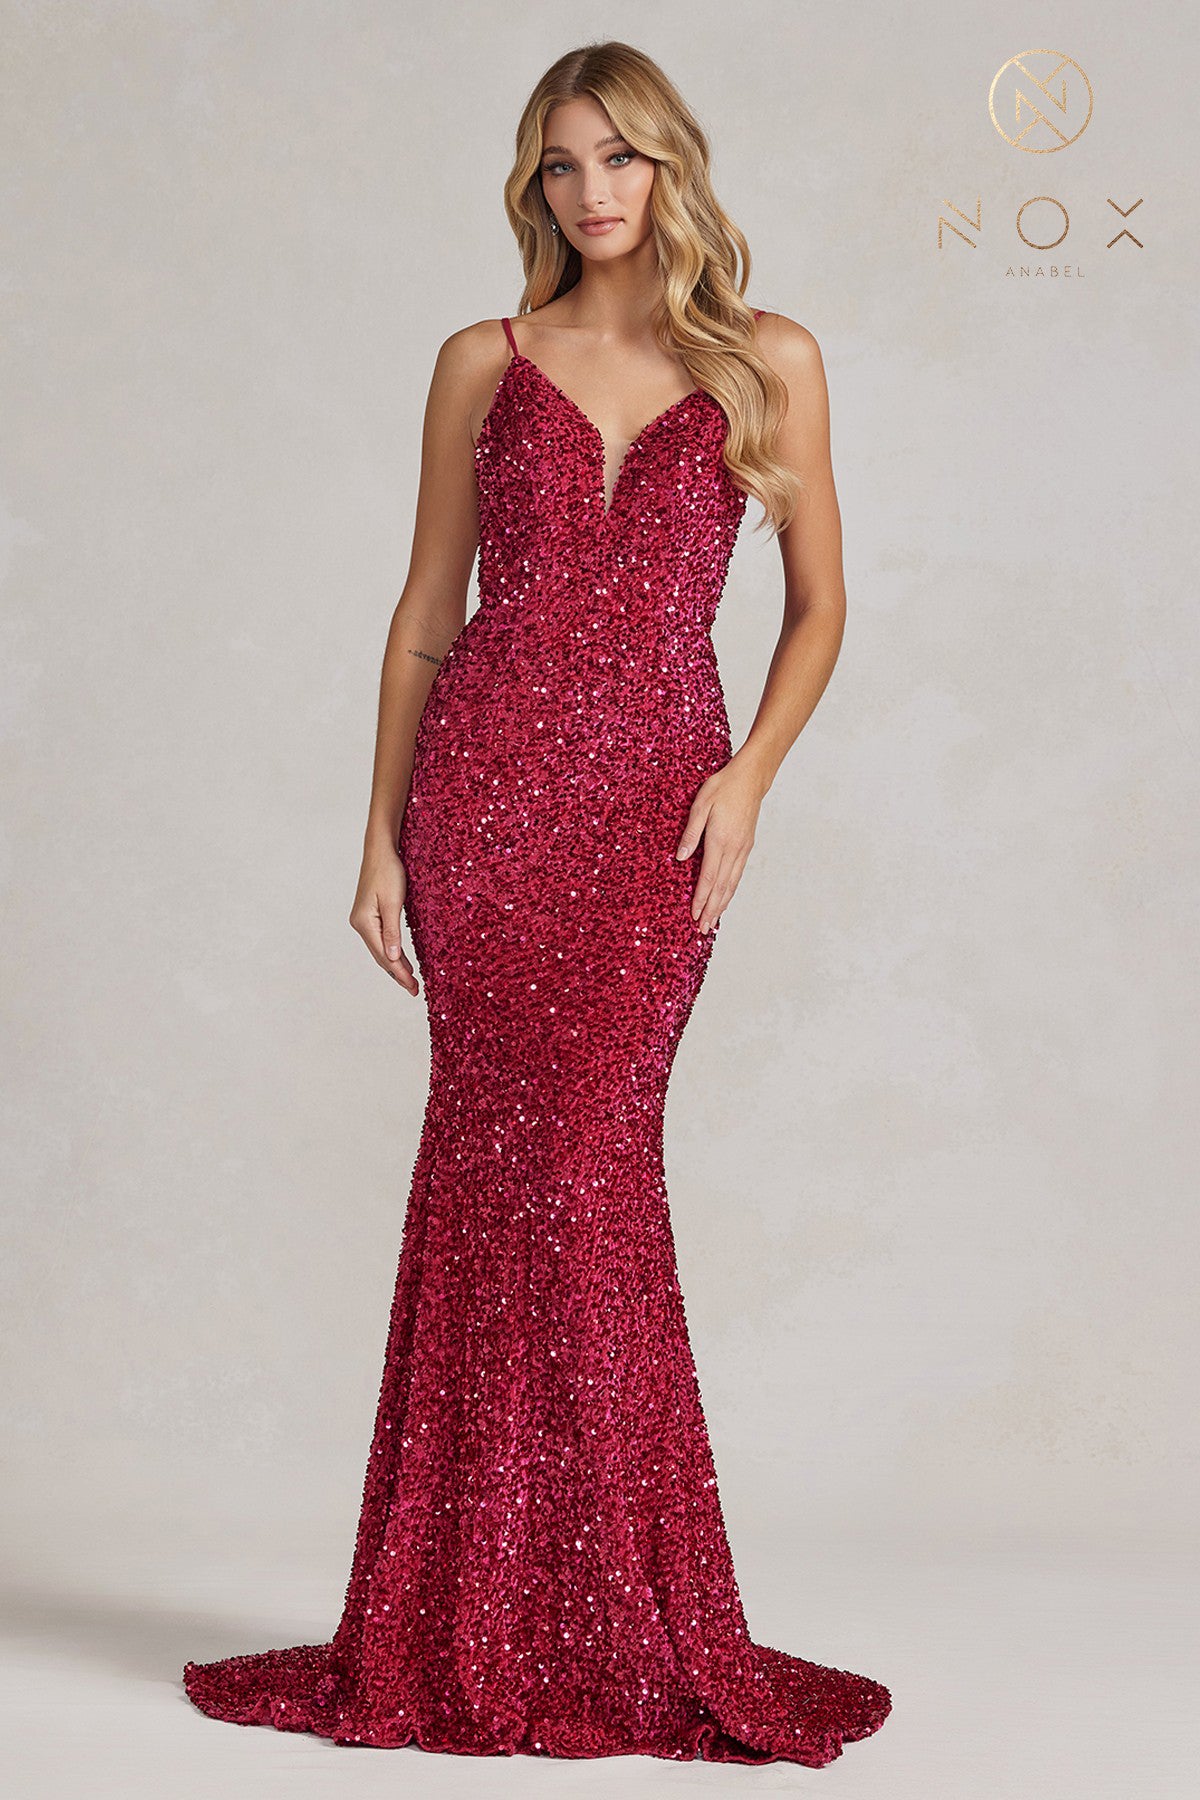 V-Neck Sequin Mermaid Dress By Nox Anabel -R1071